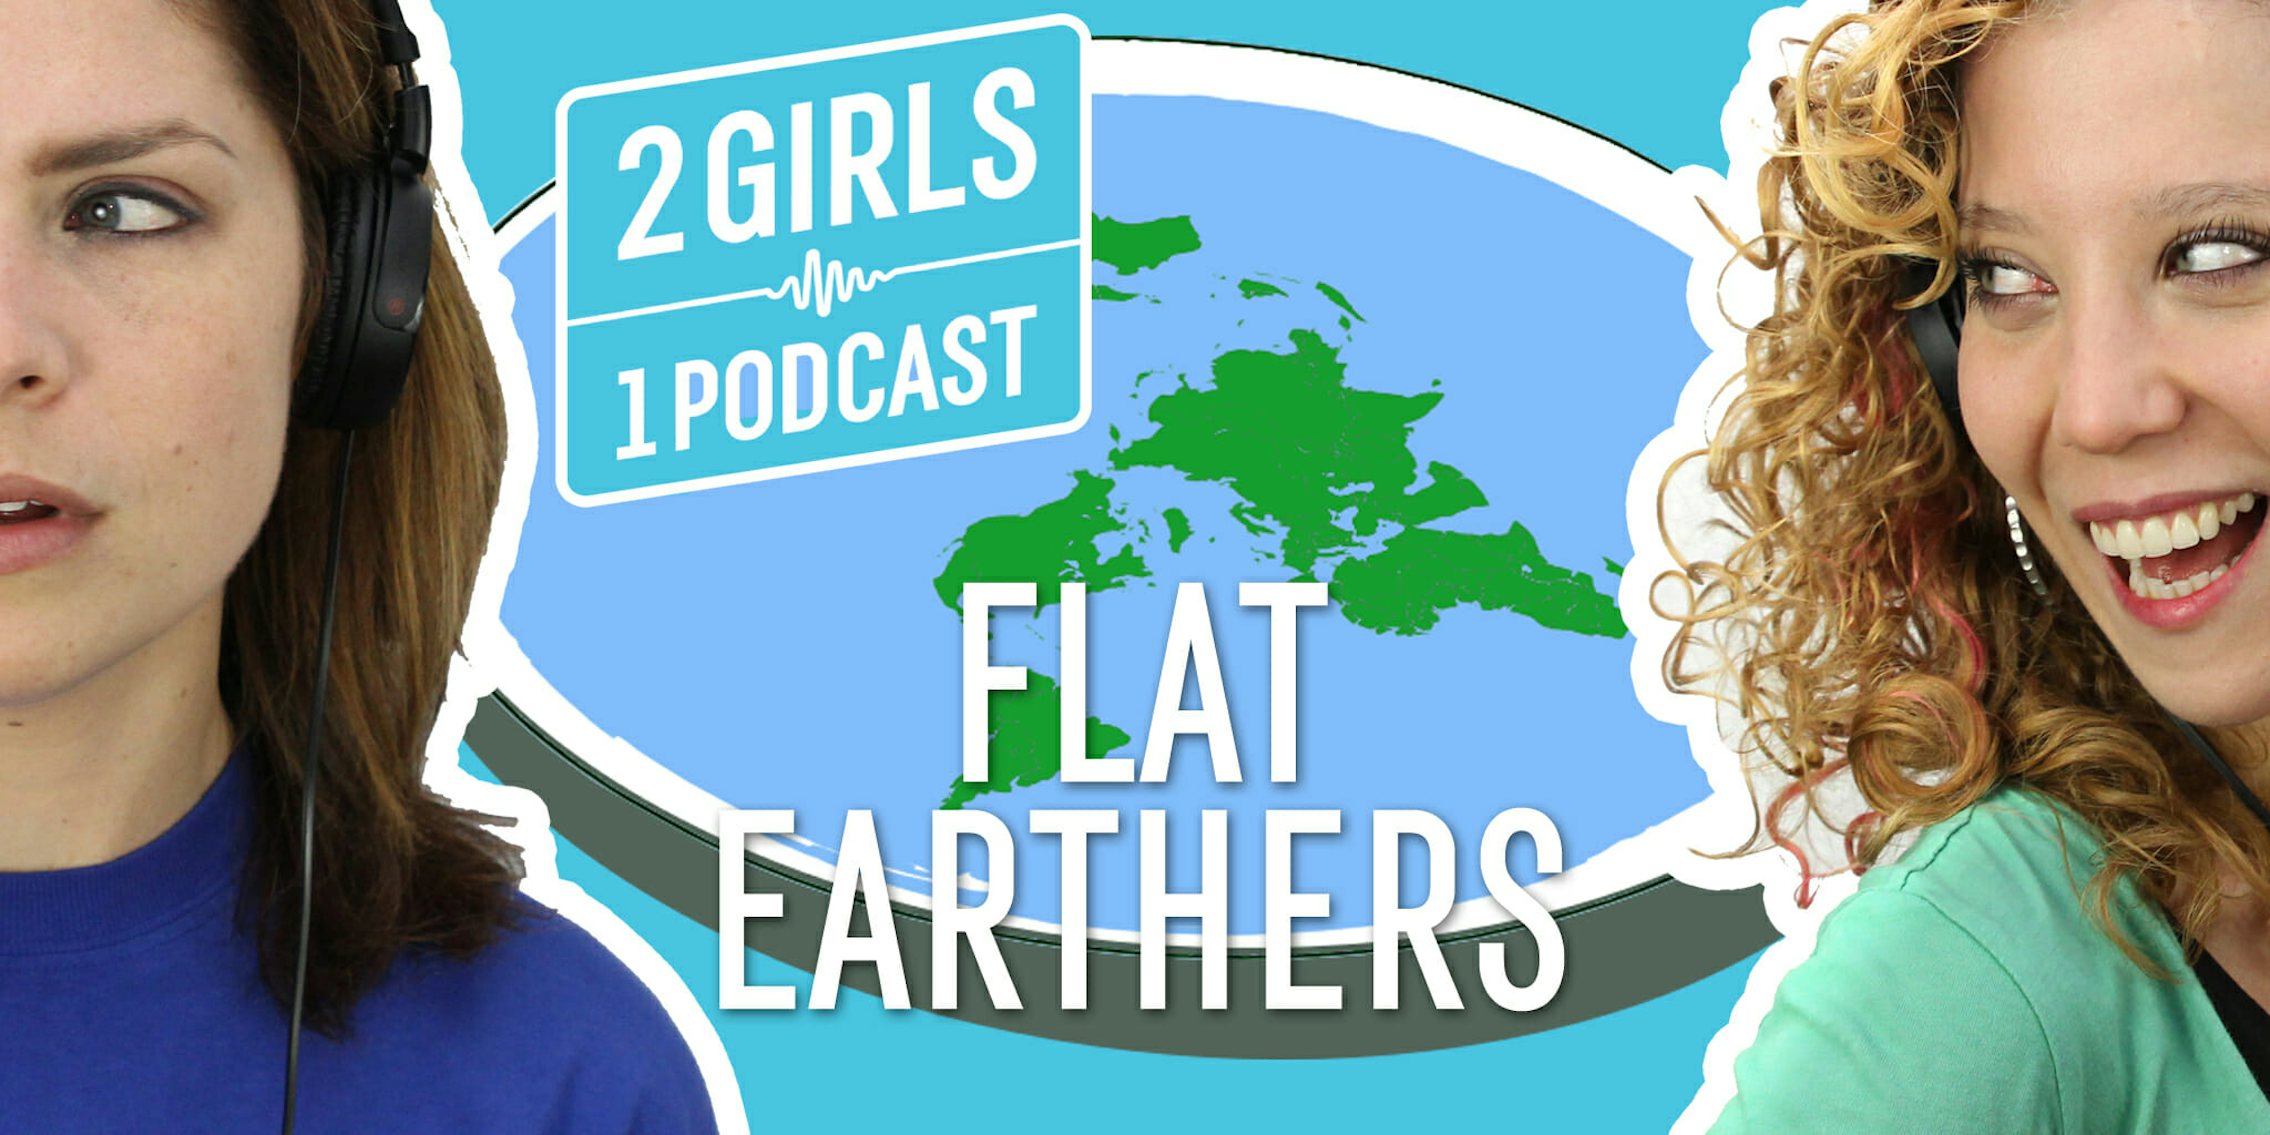 2 Girls 1 Podcast FLAT EARTHERS